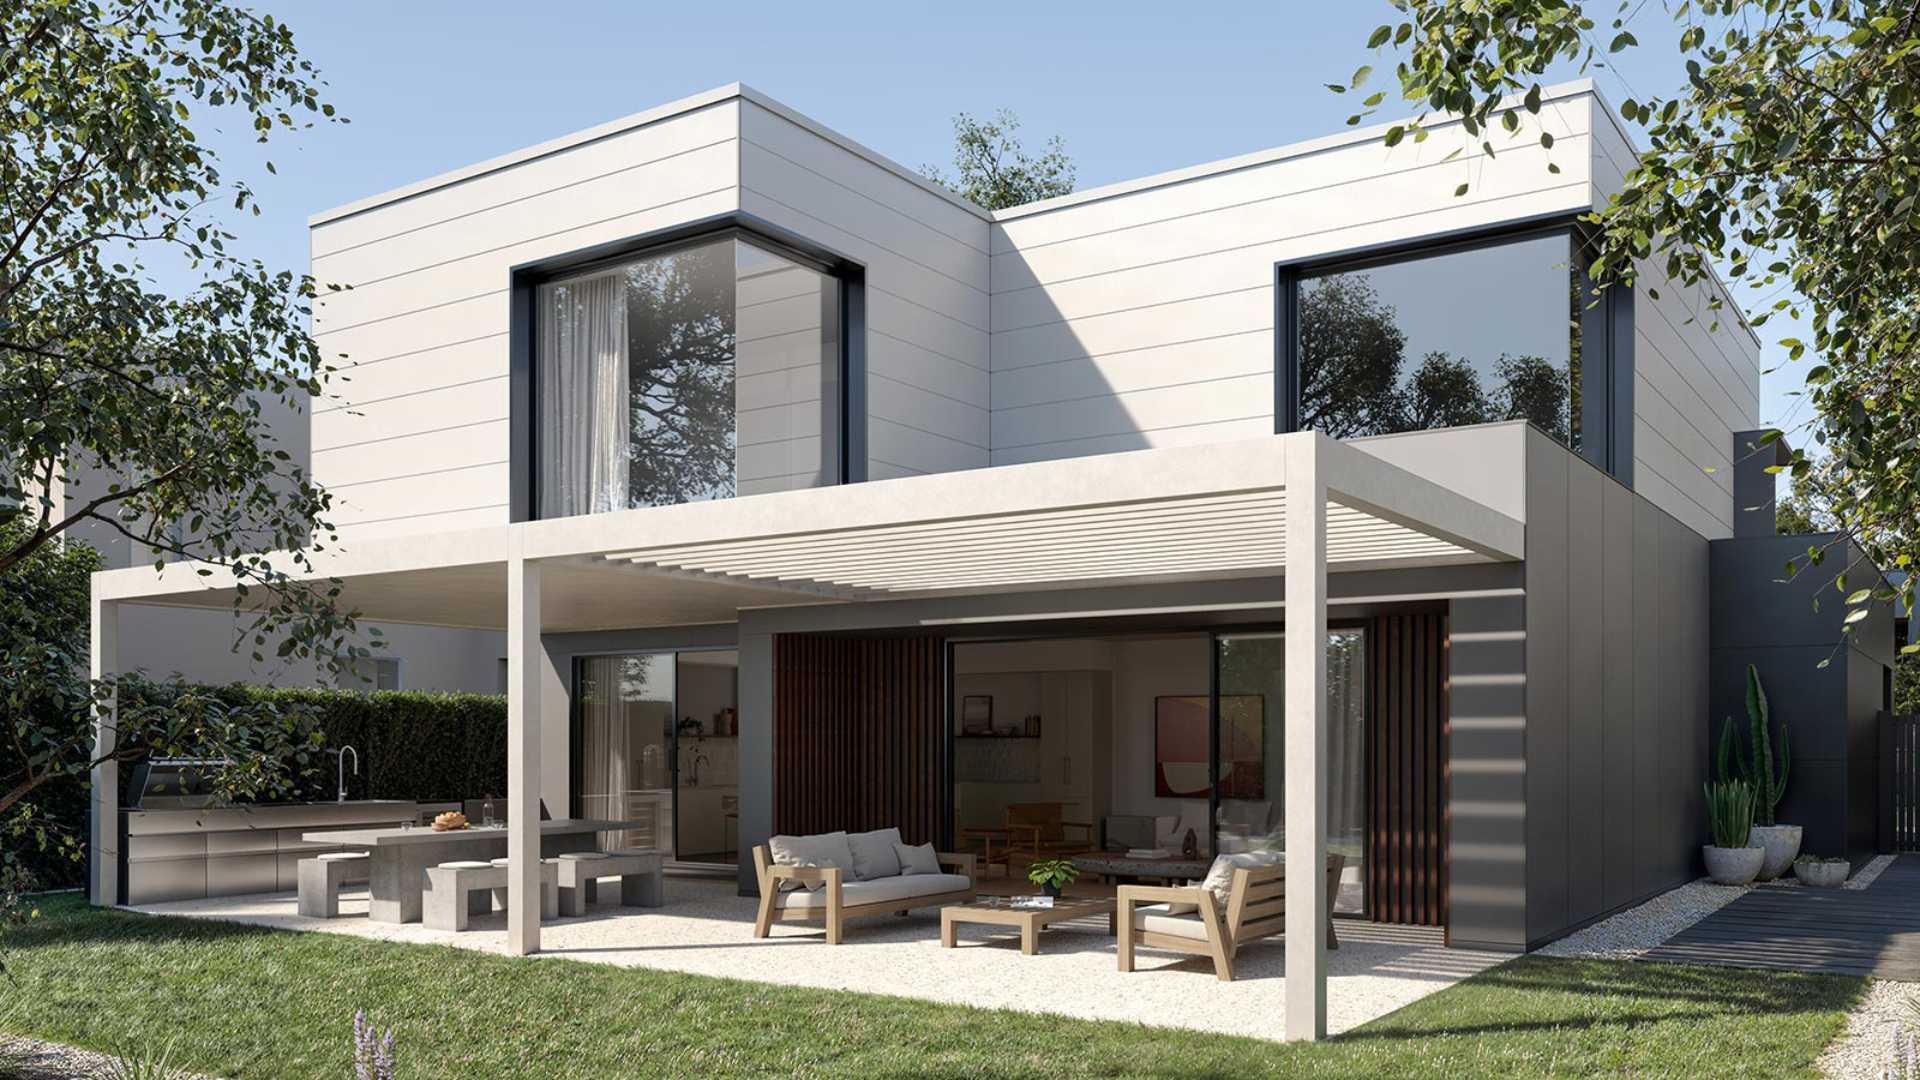 A modern home with a covered patio and porch, showcasing clean lines and contemporary design elements.